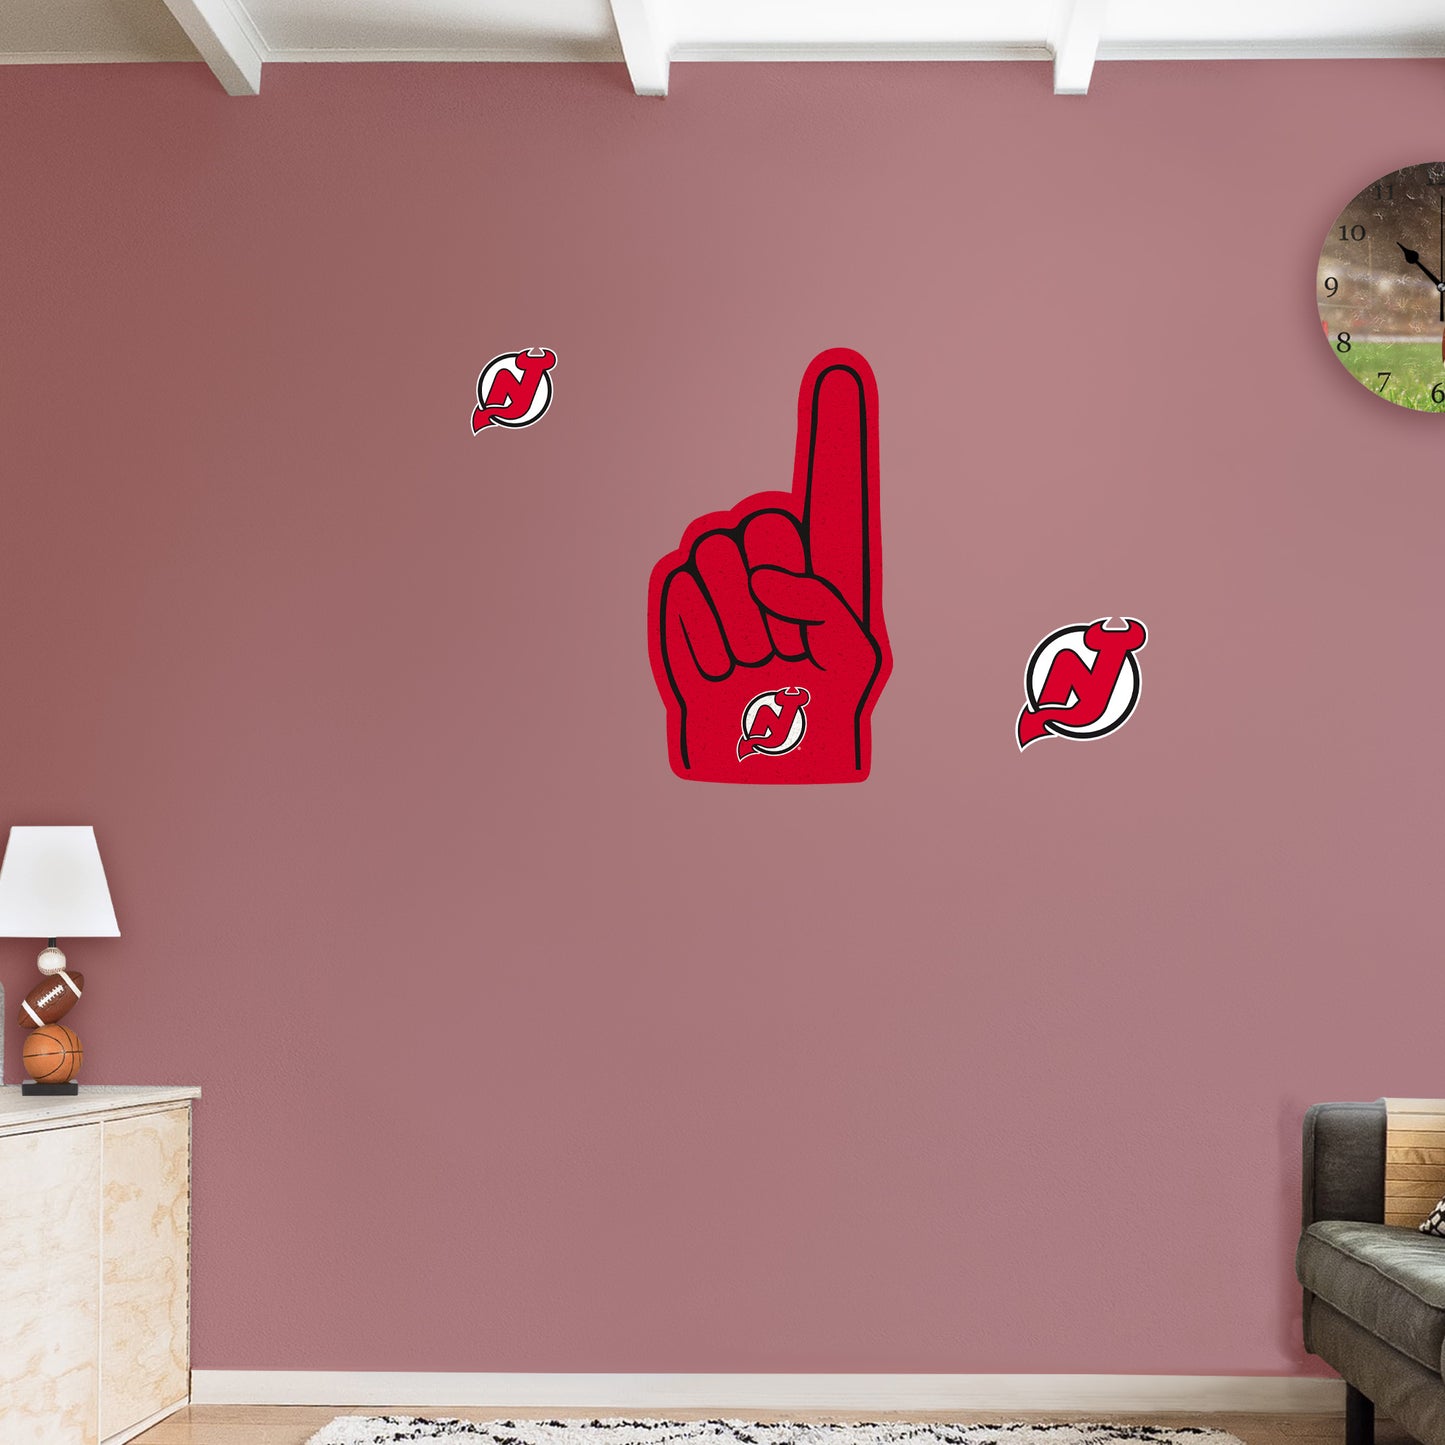 New Jersey Devils:    Foam Finger        - Officially Licensed NHL Removable     Adhesive Decal